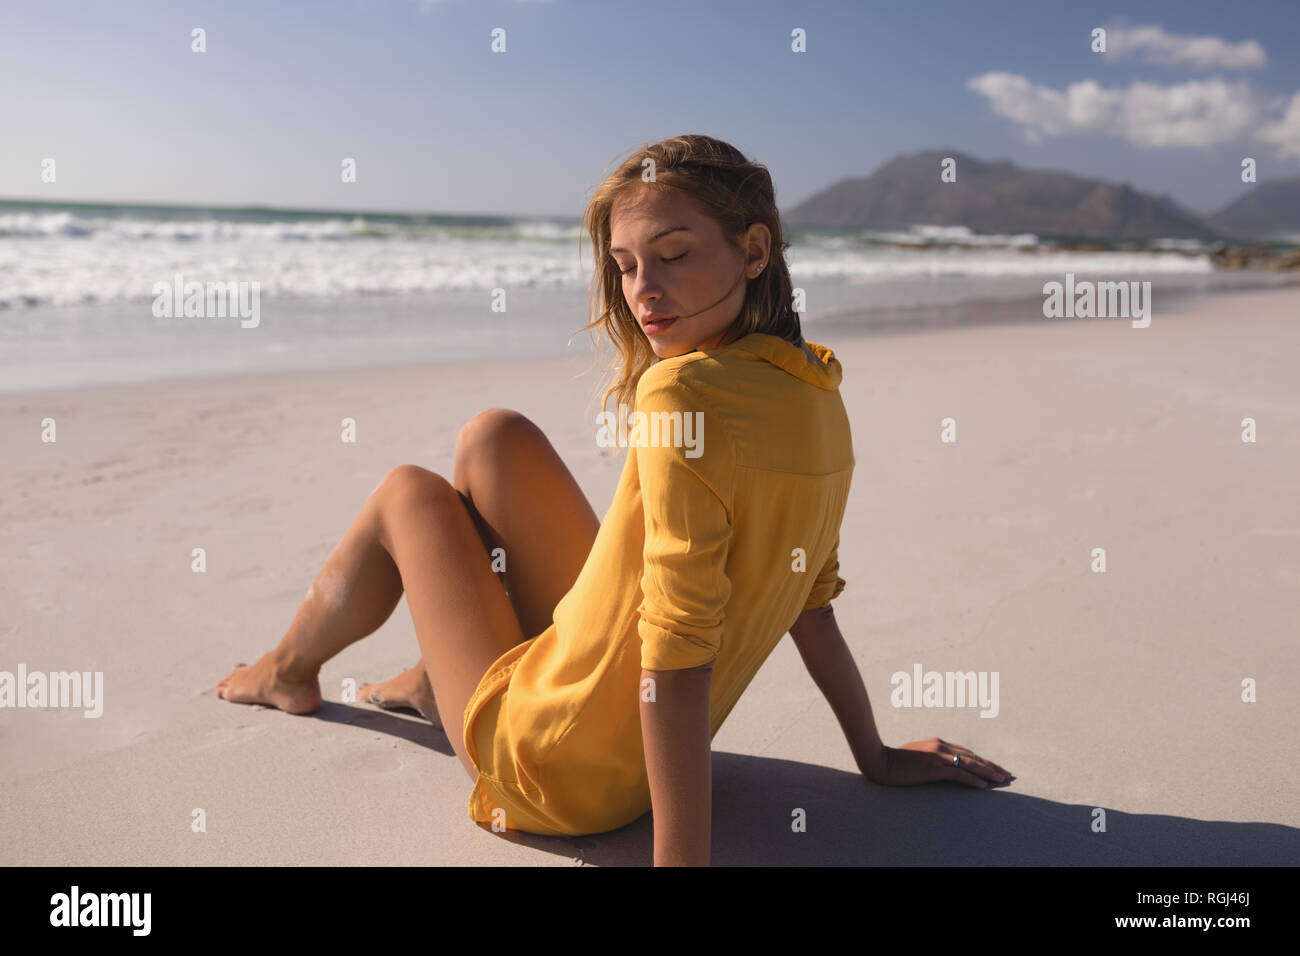 Young woman relaxing at beach on a sunny day Stock Photo